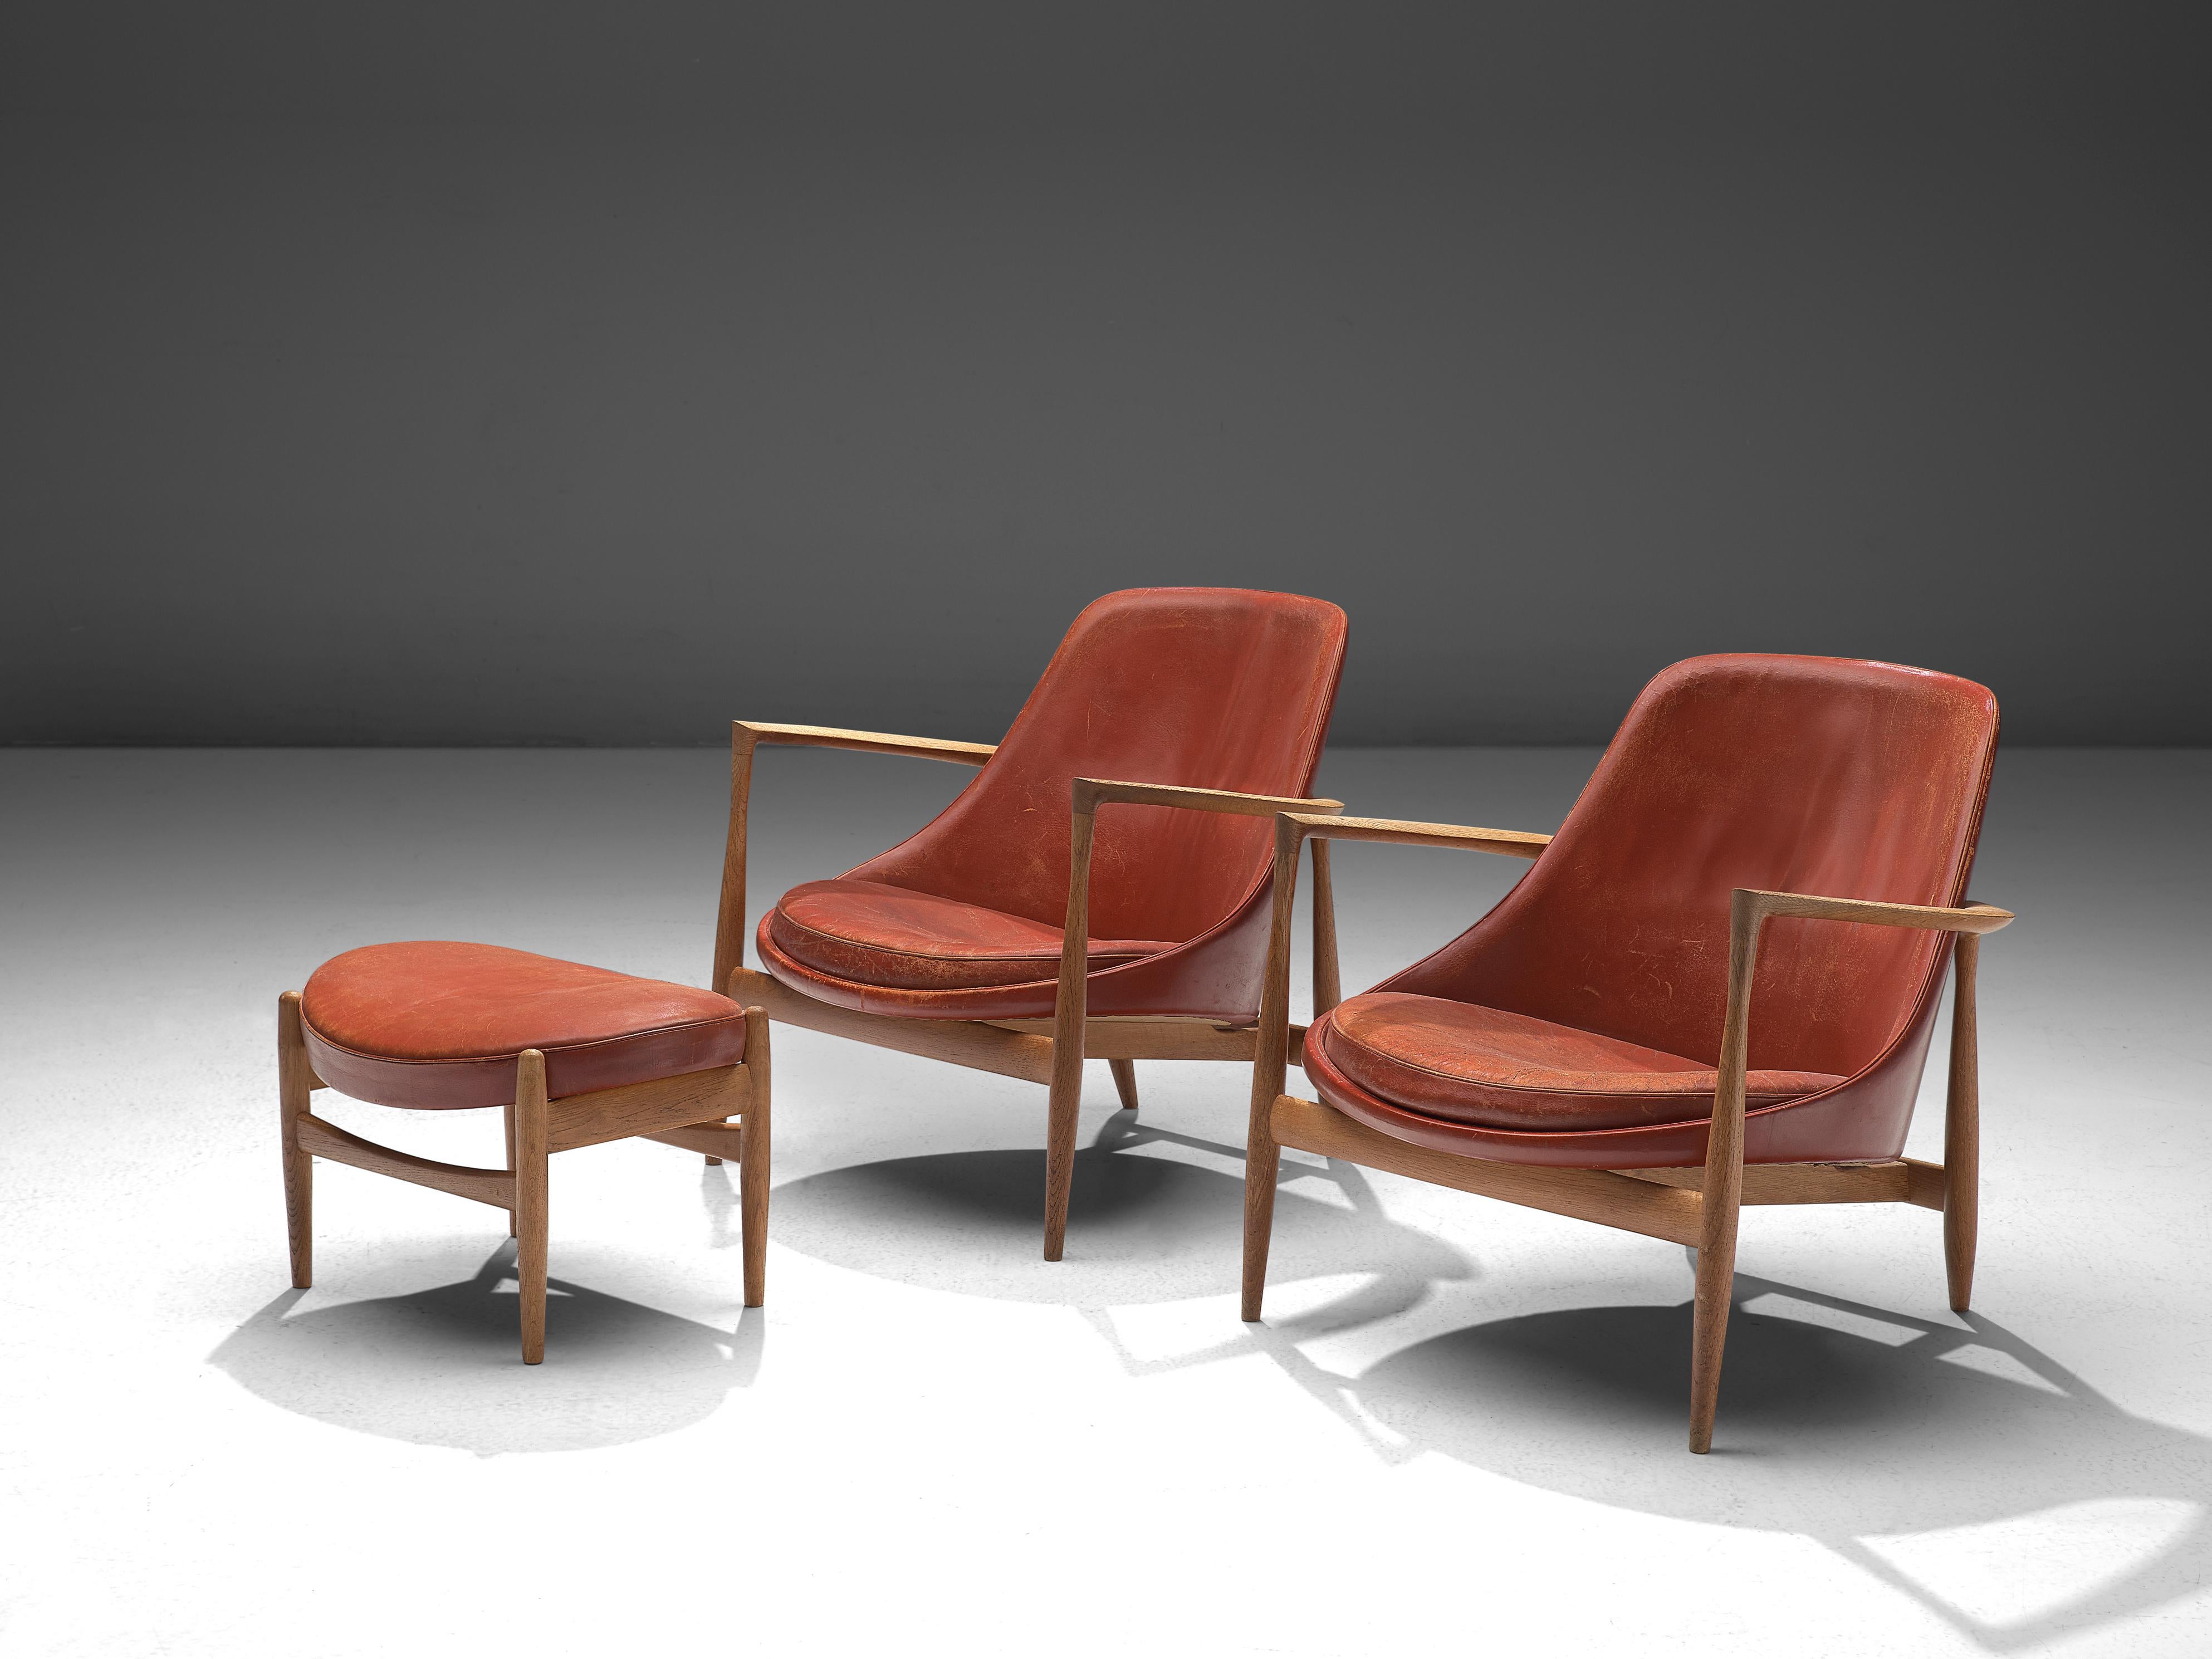 Ib Kofod-Larsen, two lounge chairs with ottoman, model U-56 'Elizabeth', oak and red leather, Denmark, 1956.

These are two of Kofod-Larsen highest-quality armchairs, with an oak frame and beautiful details in the design. The seating holds beautiful